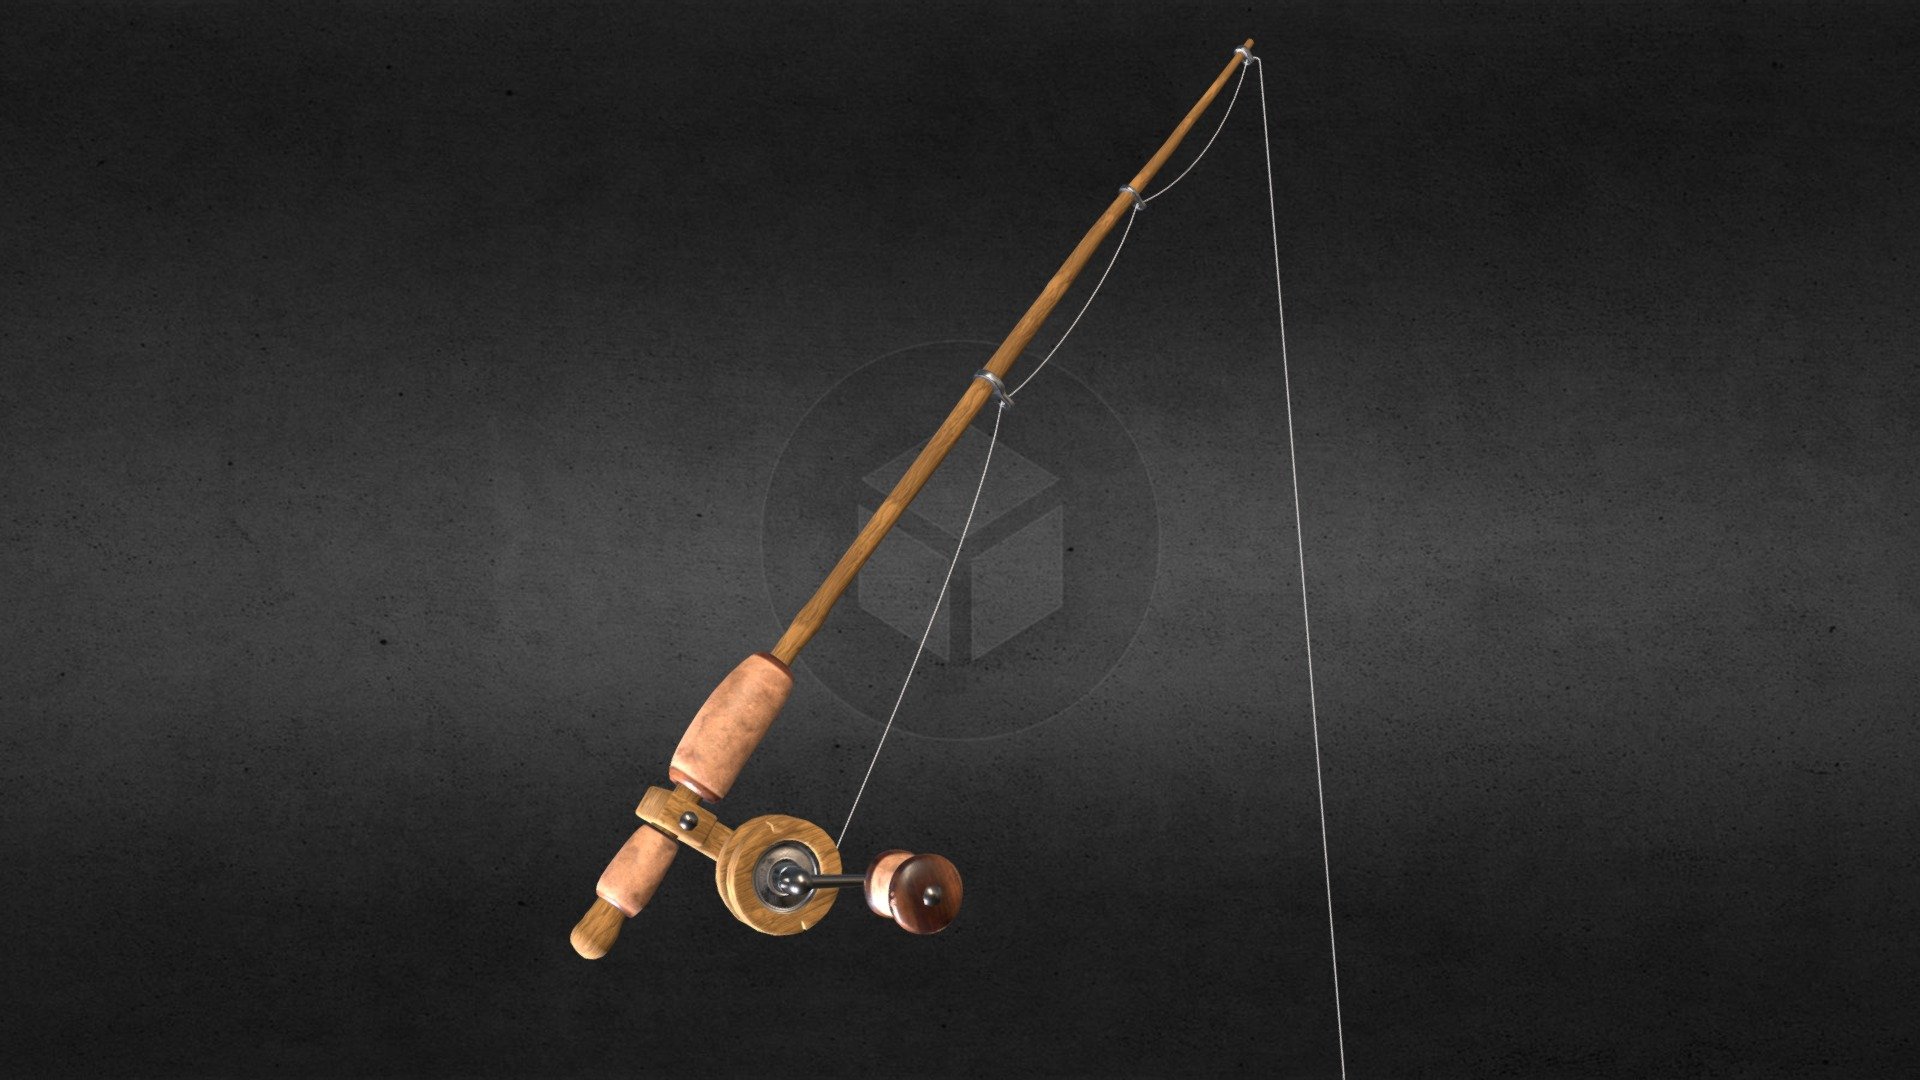 The Fisher's Rod is a highly detailed 3D model with animation and PBR texturing. It features a fully functional rig, allowing for realistic movements and animations of the fishing rod and rope. The model's texturing is based on PBR materials, providing high-quality surface details and realistic reflections. Perfect for games, animations, and visualizations.

I also provide the original Adobe Substance Painter file here.

The fishing rod is only animated in the Blender file.

Credits:
HDRi Texture in Blender file
https://polyhaven.com/a/kiara_6_afternoon - Fishing rod - Buy Royalty Free 3D model by Larry3d 3d model